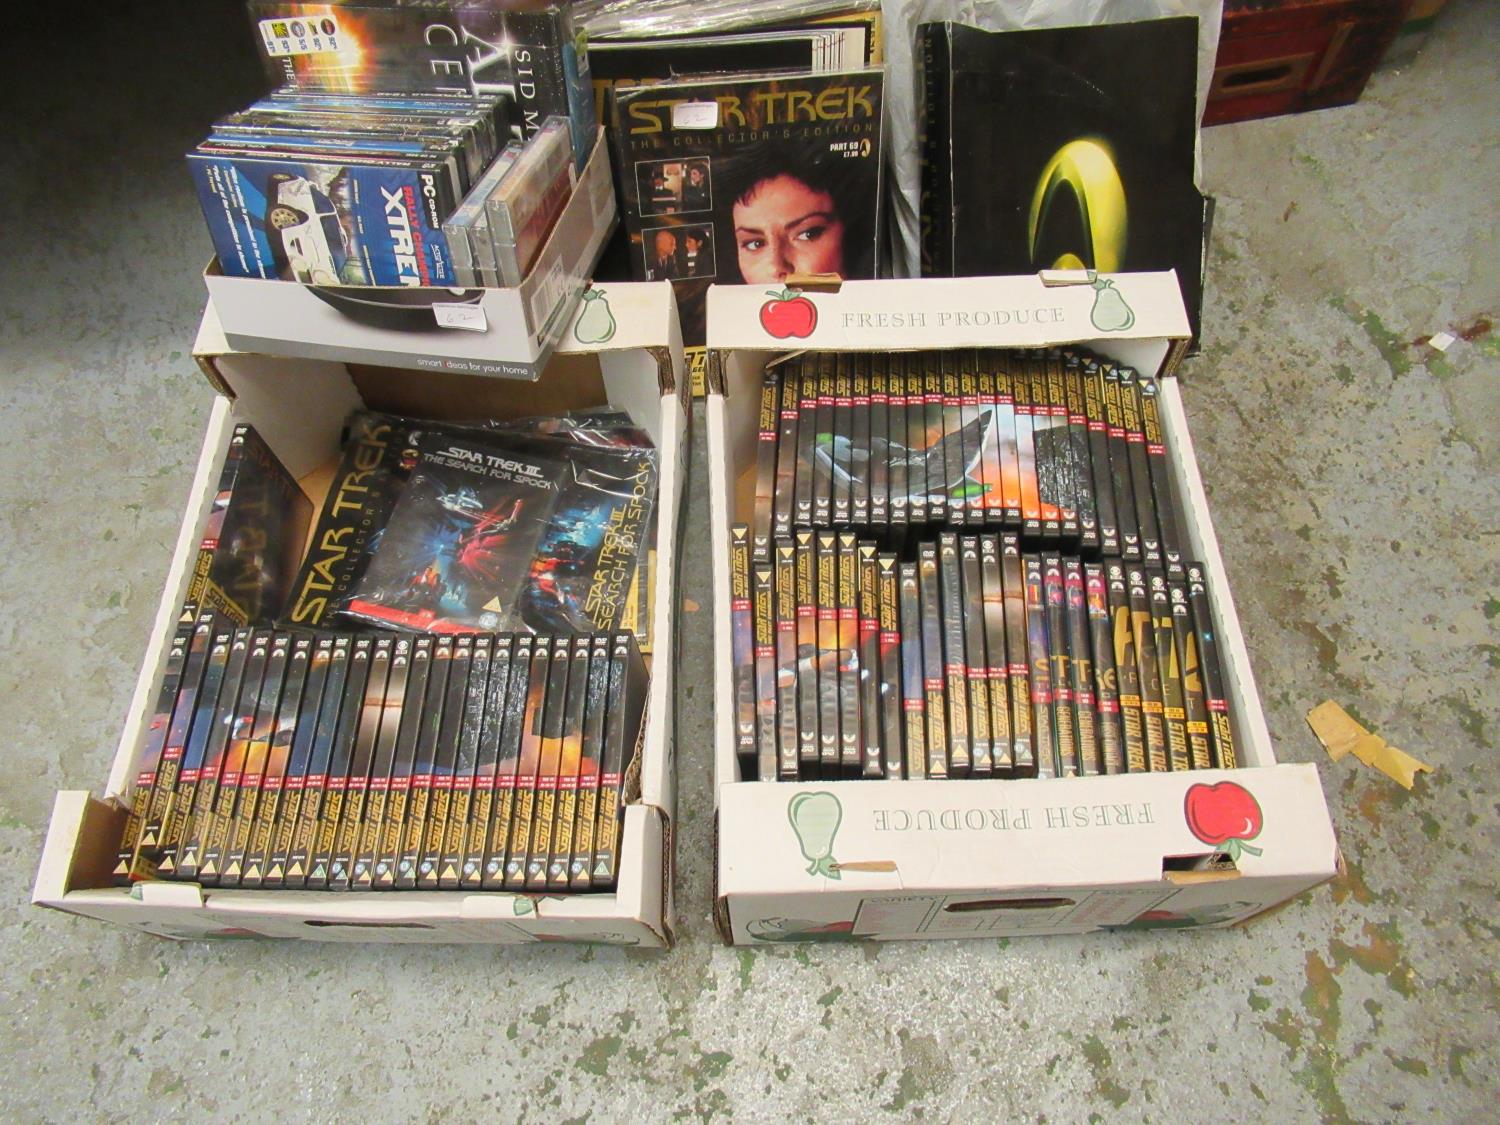 Large quantity of Star Trek DVD's together with a quantity of various PC games